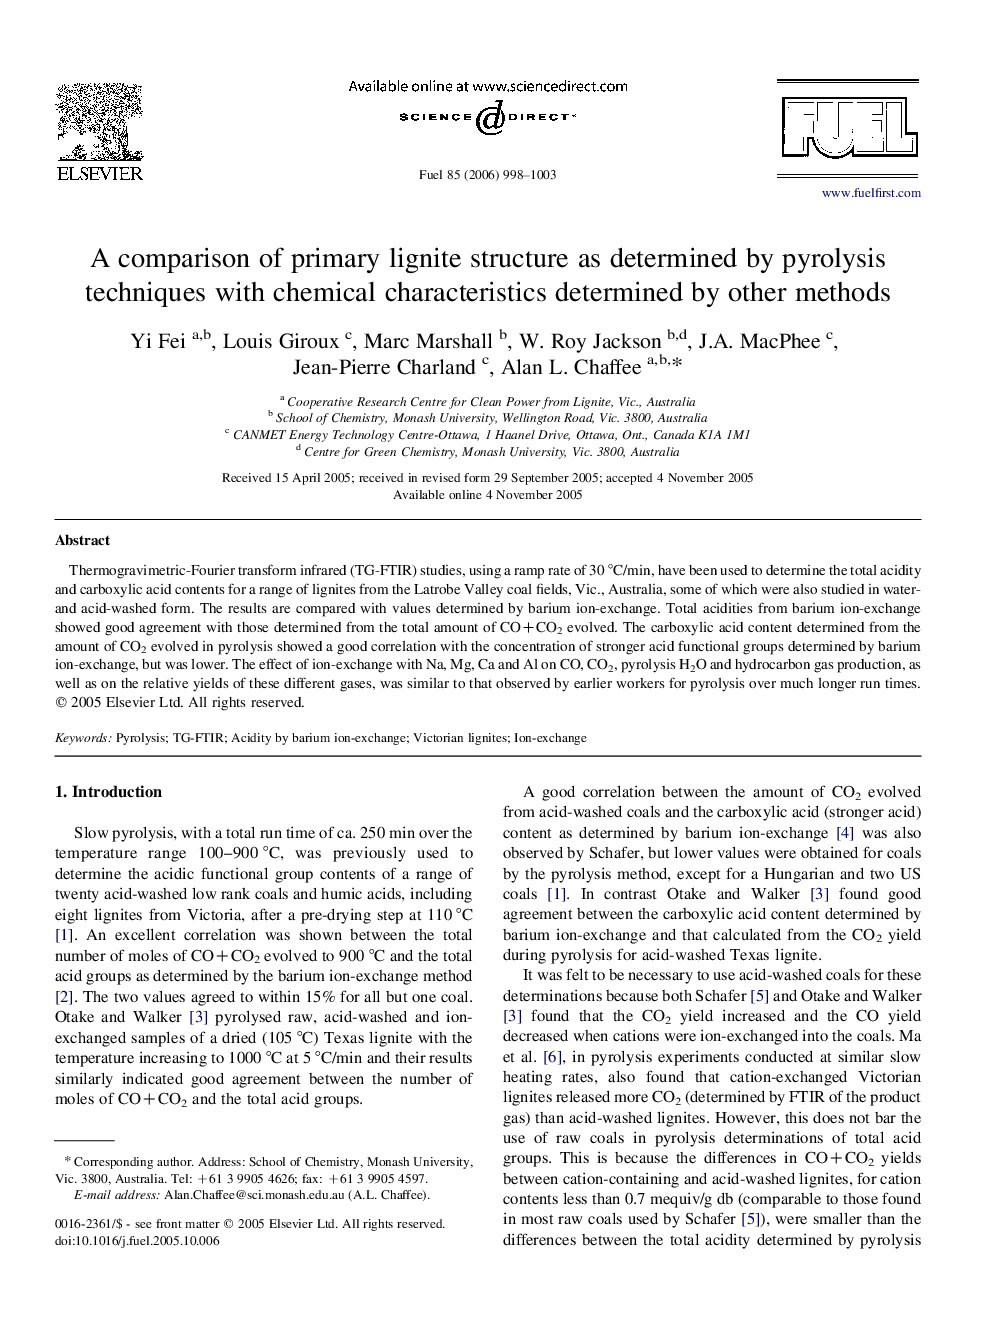 A comparison of primary lignite structure as determined by pyrolysis techniques with chemical characteristics determined by other methods